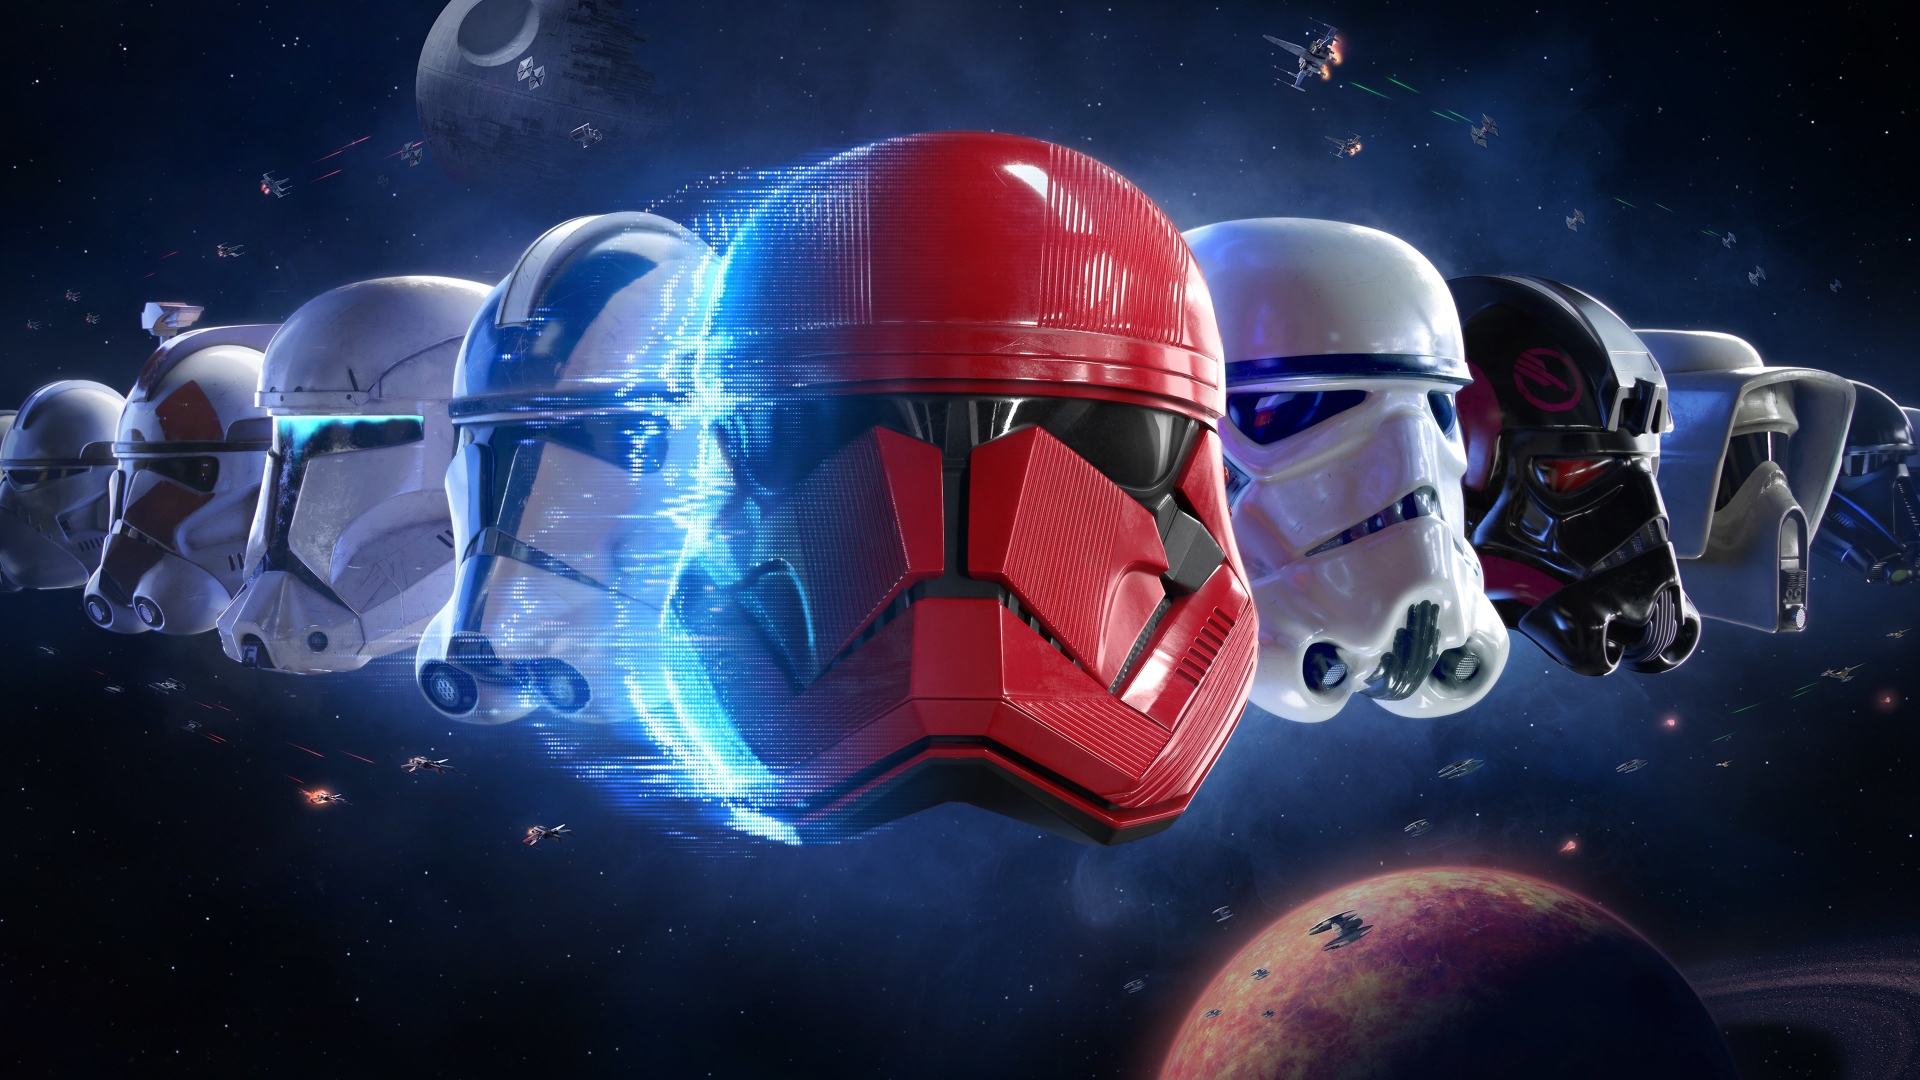 Star Wars Battlefront 2 - PS4 - Wallpapers - 1920x1080